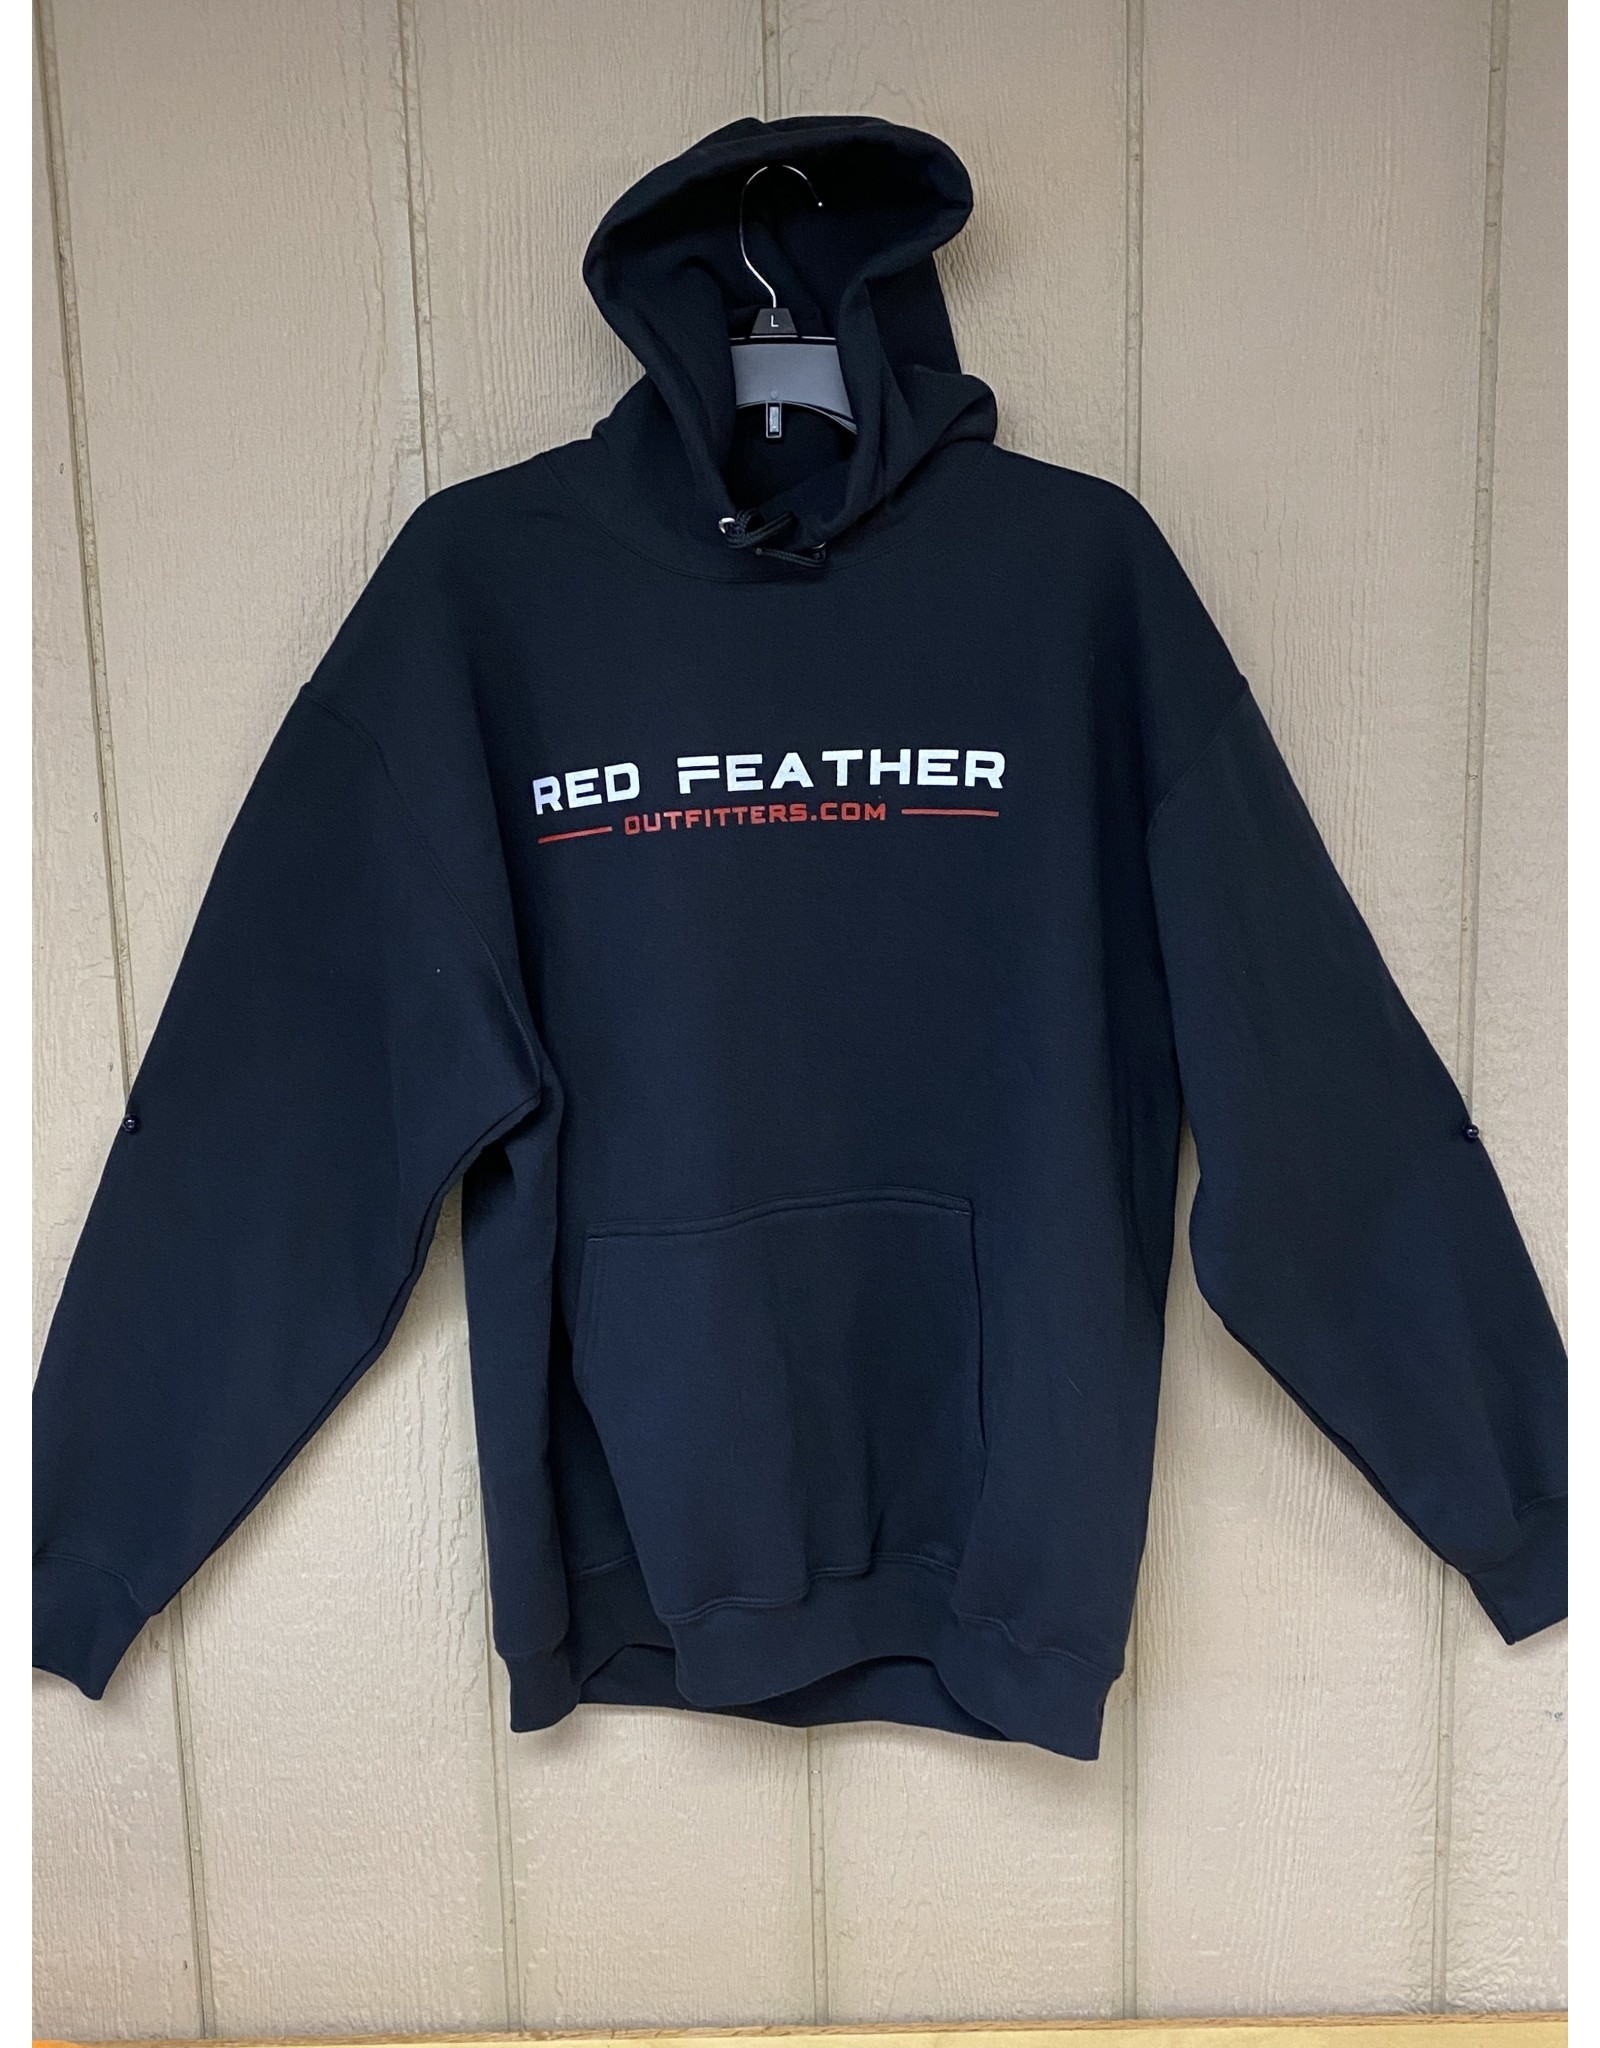 Hoodie, Red Feather Outfitters, Small